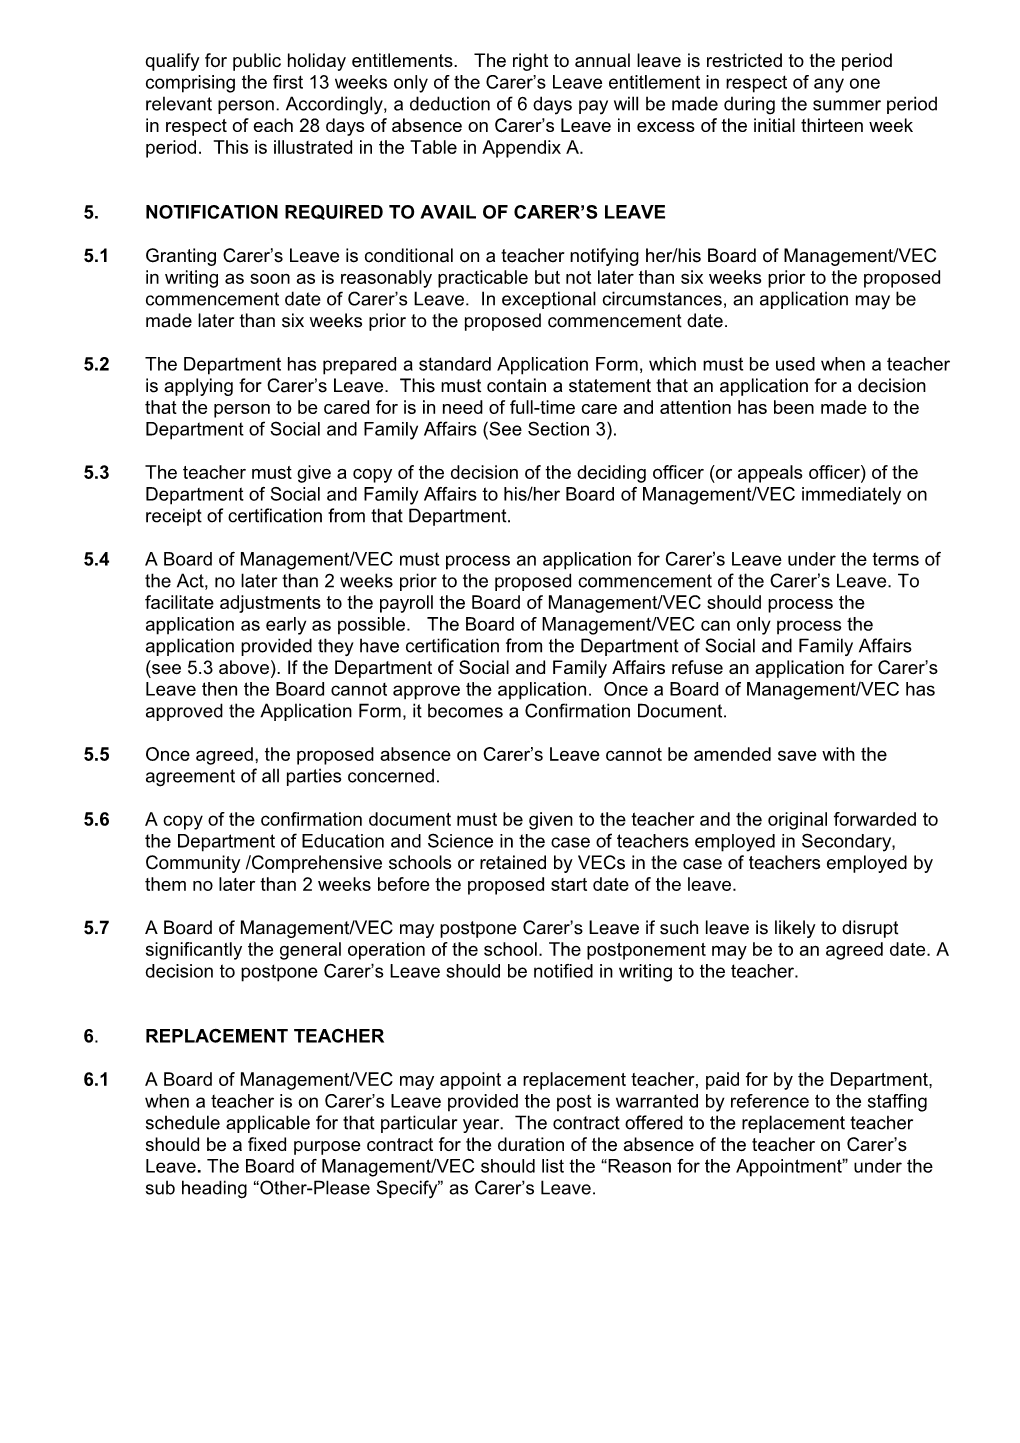 Circular PPT17/03 - Carer S Leave for Teachers in Second Level Schools (File Format Word 136KB)